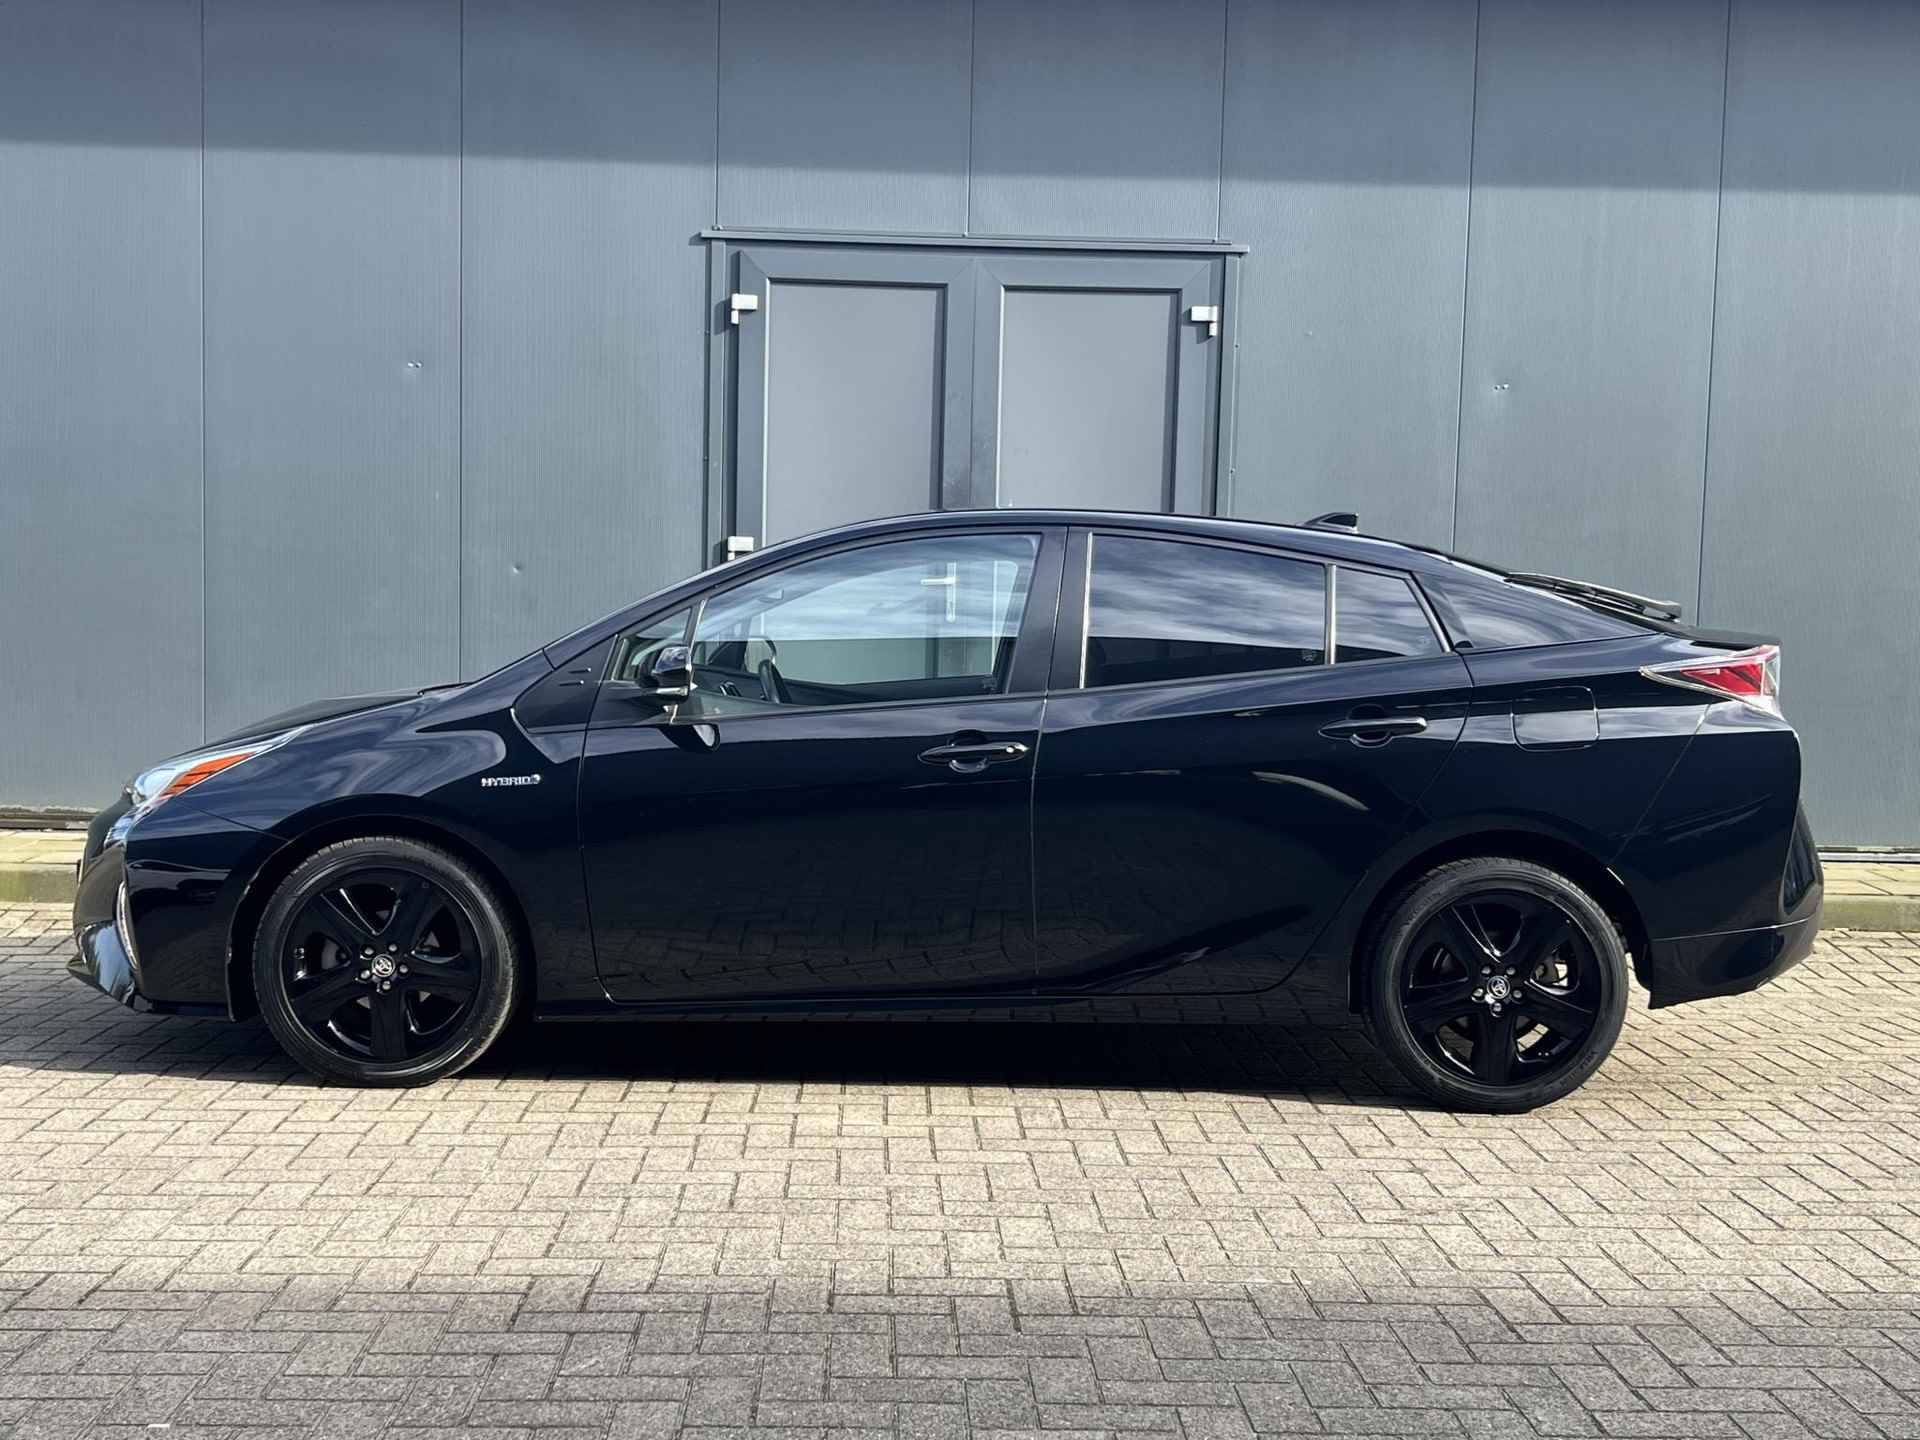 Toyota Prius 1.8 First Edition Automaat / Navigatie / Cruise Control / Climate Control / Stoelverwarming / DAB / Bluetooth / Head-Up Display / Dodehoek Herkenning / Camera - 9/30